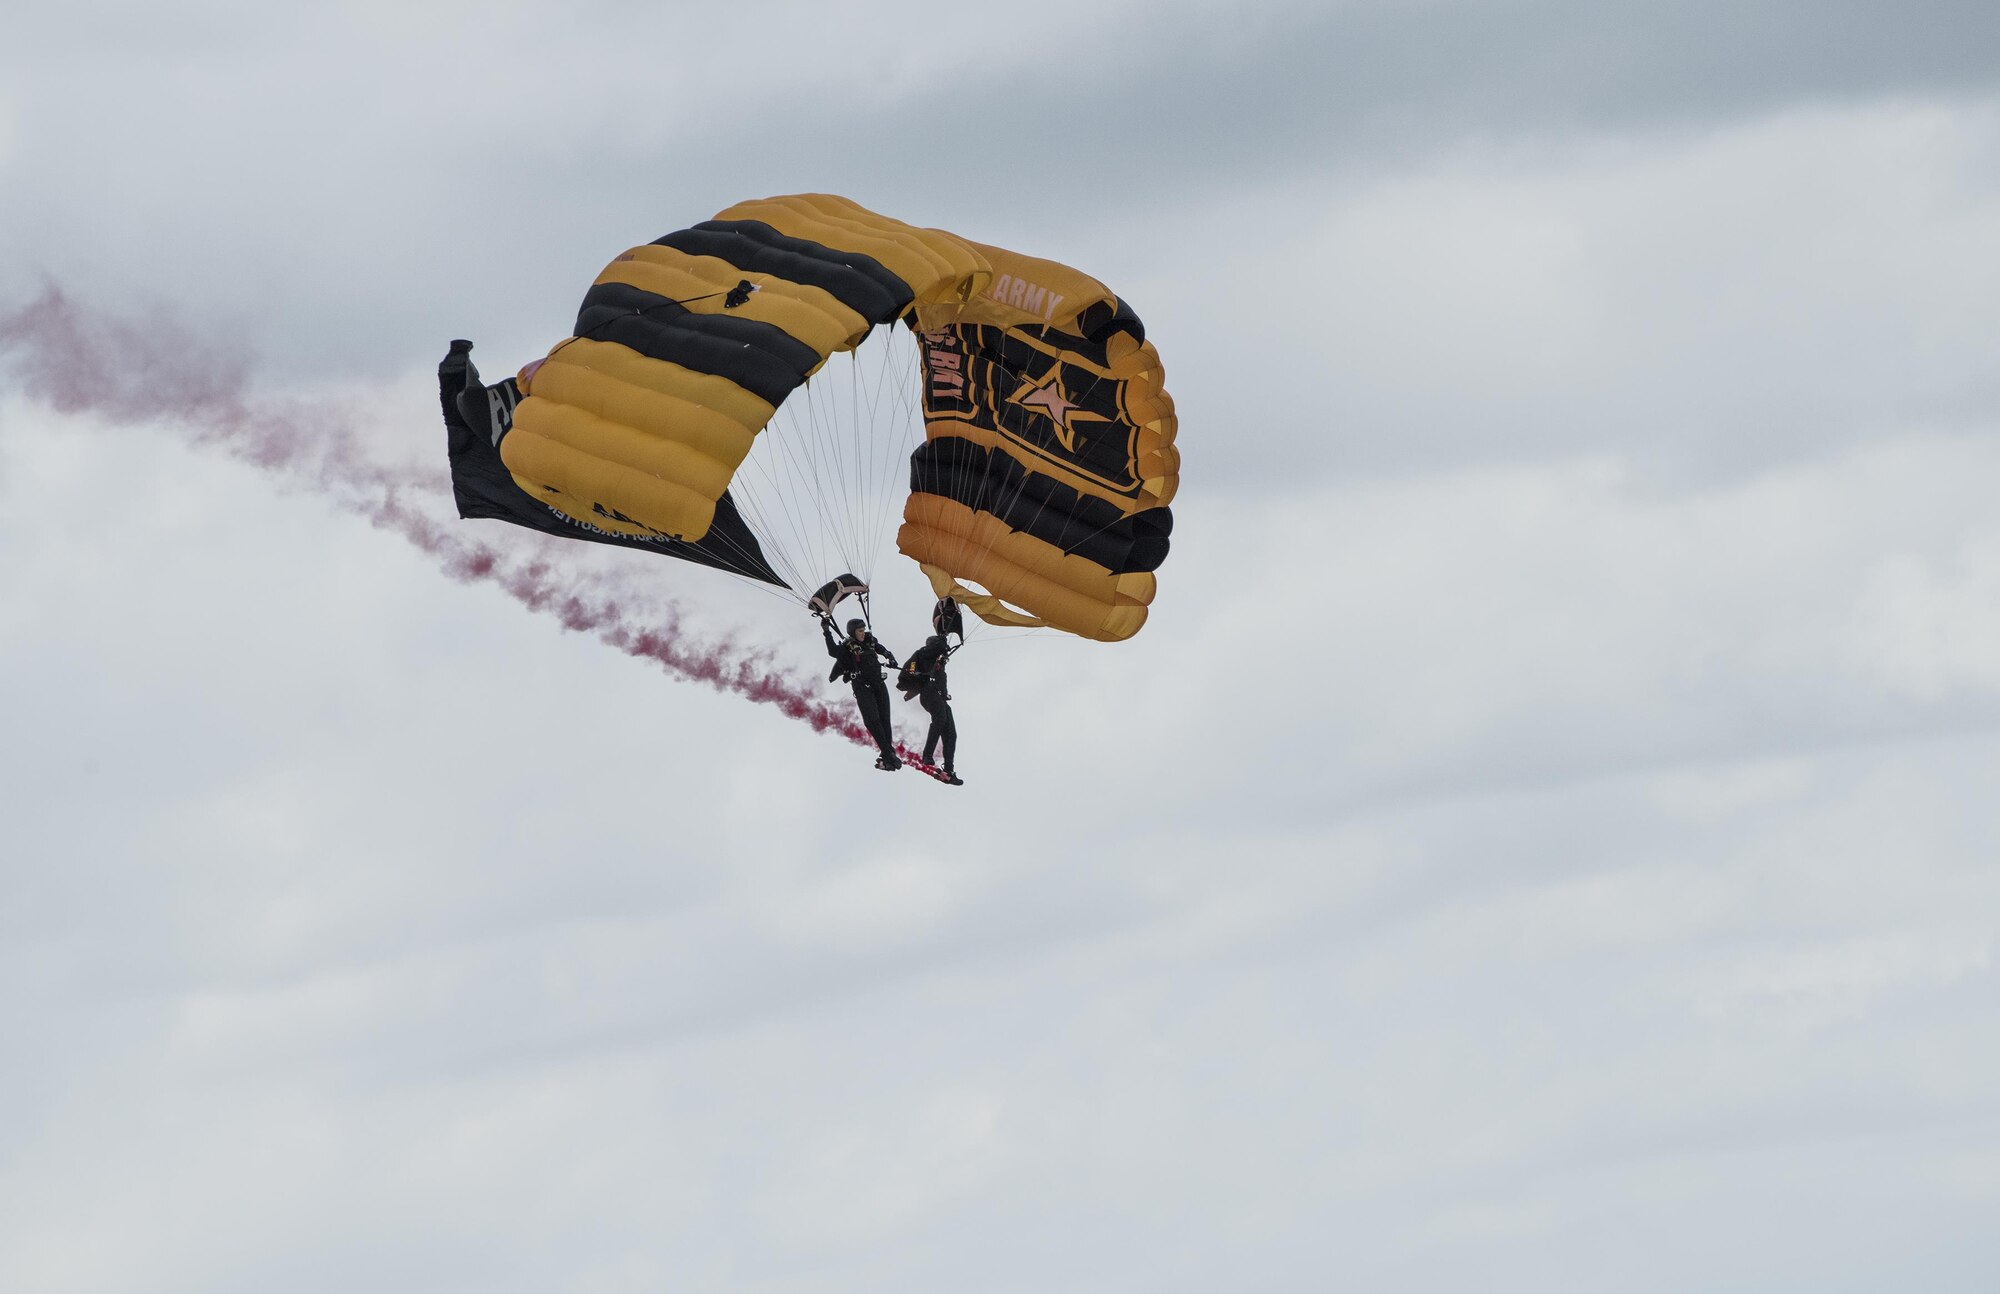 The U.S. Army Golden Knights perform sky diving manuevers during the Wings Over Solano Air Show at Travis Air Force Base, Calif., May 6, 2017. The two-day event also featured performances by the U.S. Air Force Thunderbirds, flyovers and static displays. (U.S. Air Force photo by Heide Couch)